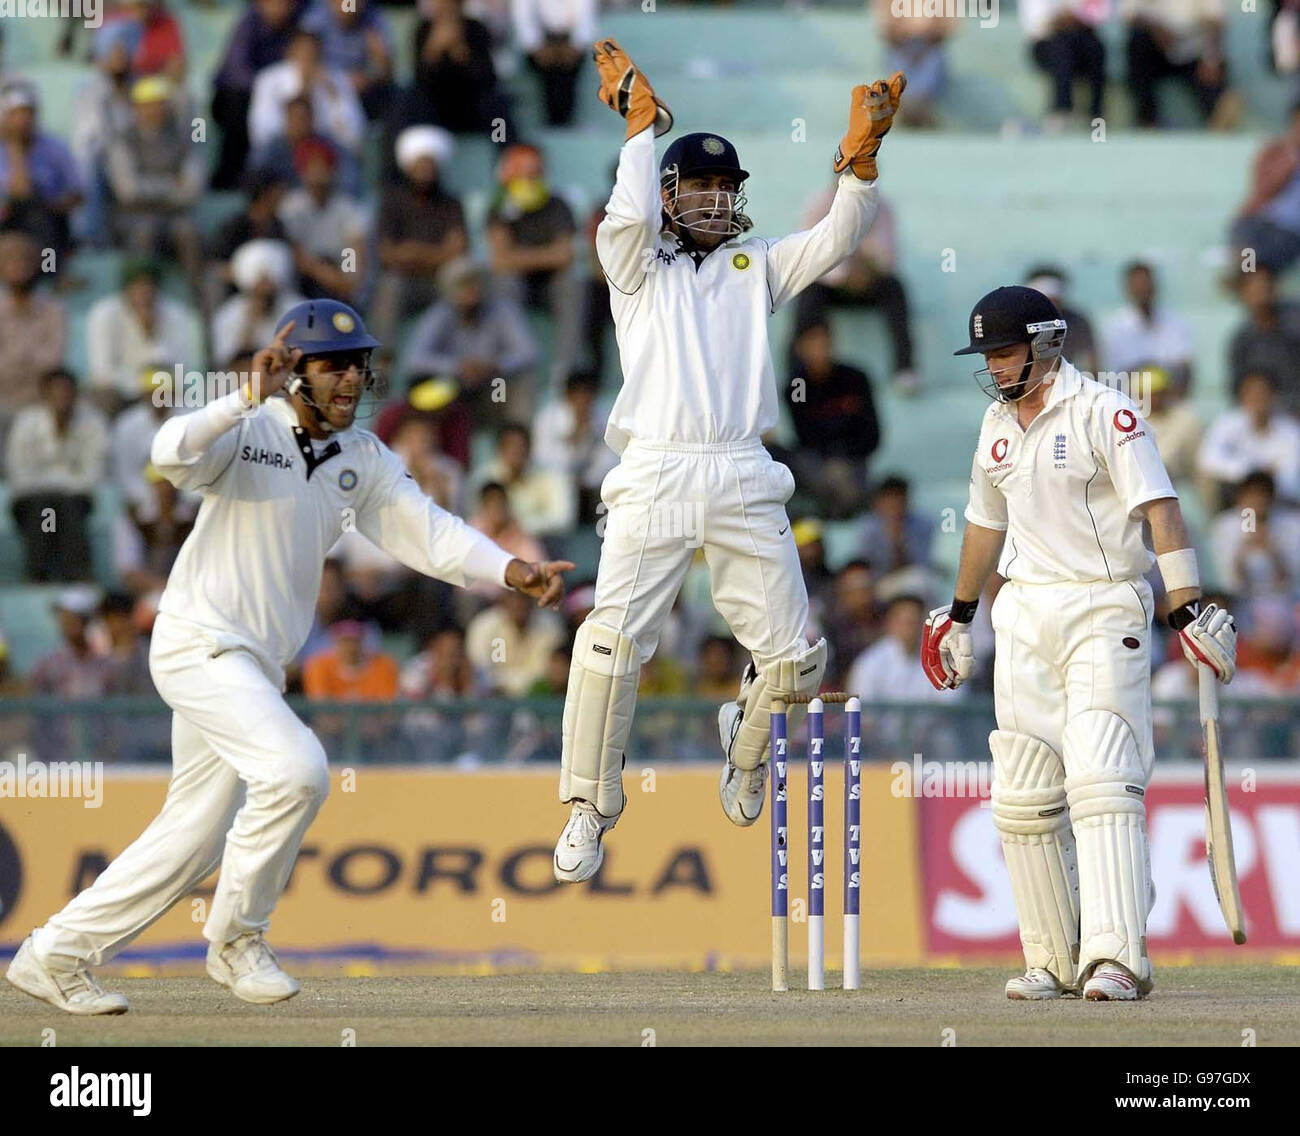 England's Ian Bell edges the ball to Indian wicketkeeper Mahendra Dhoni and is dismissed during the fourth day of the second Test match at the PCA Stadium, Mohali, India, Sunday March 12, 2006. PRESS ASSOCIATION Photo. Photo credit should read: Rebecca Naden/PA. Stock Photo